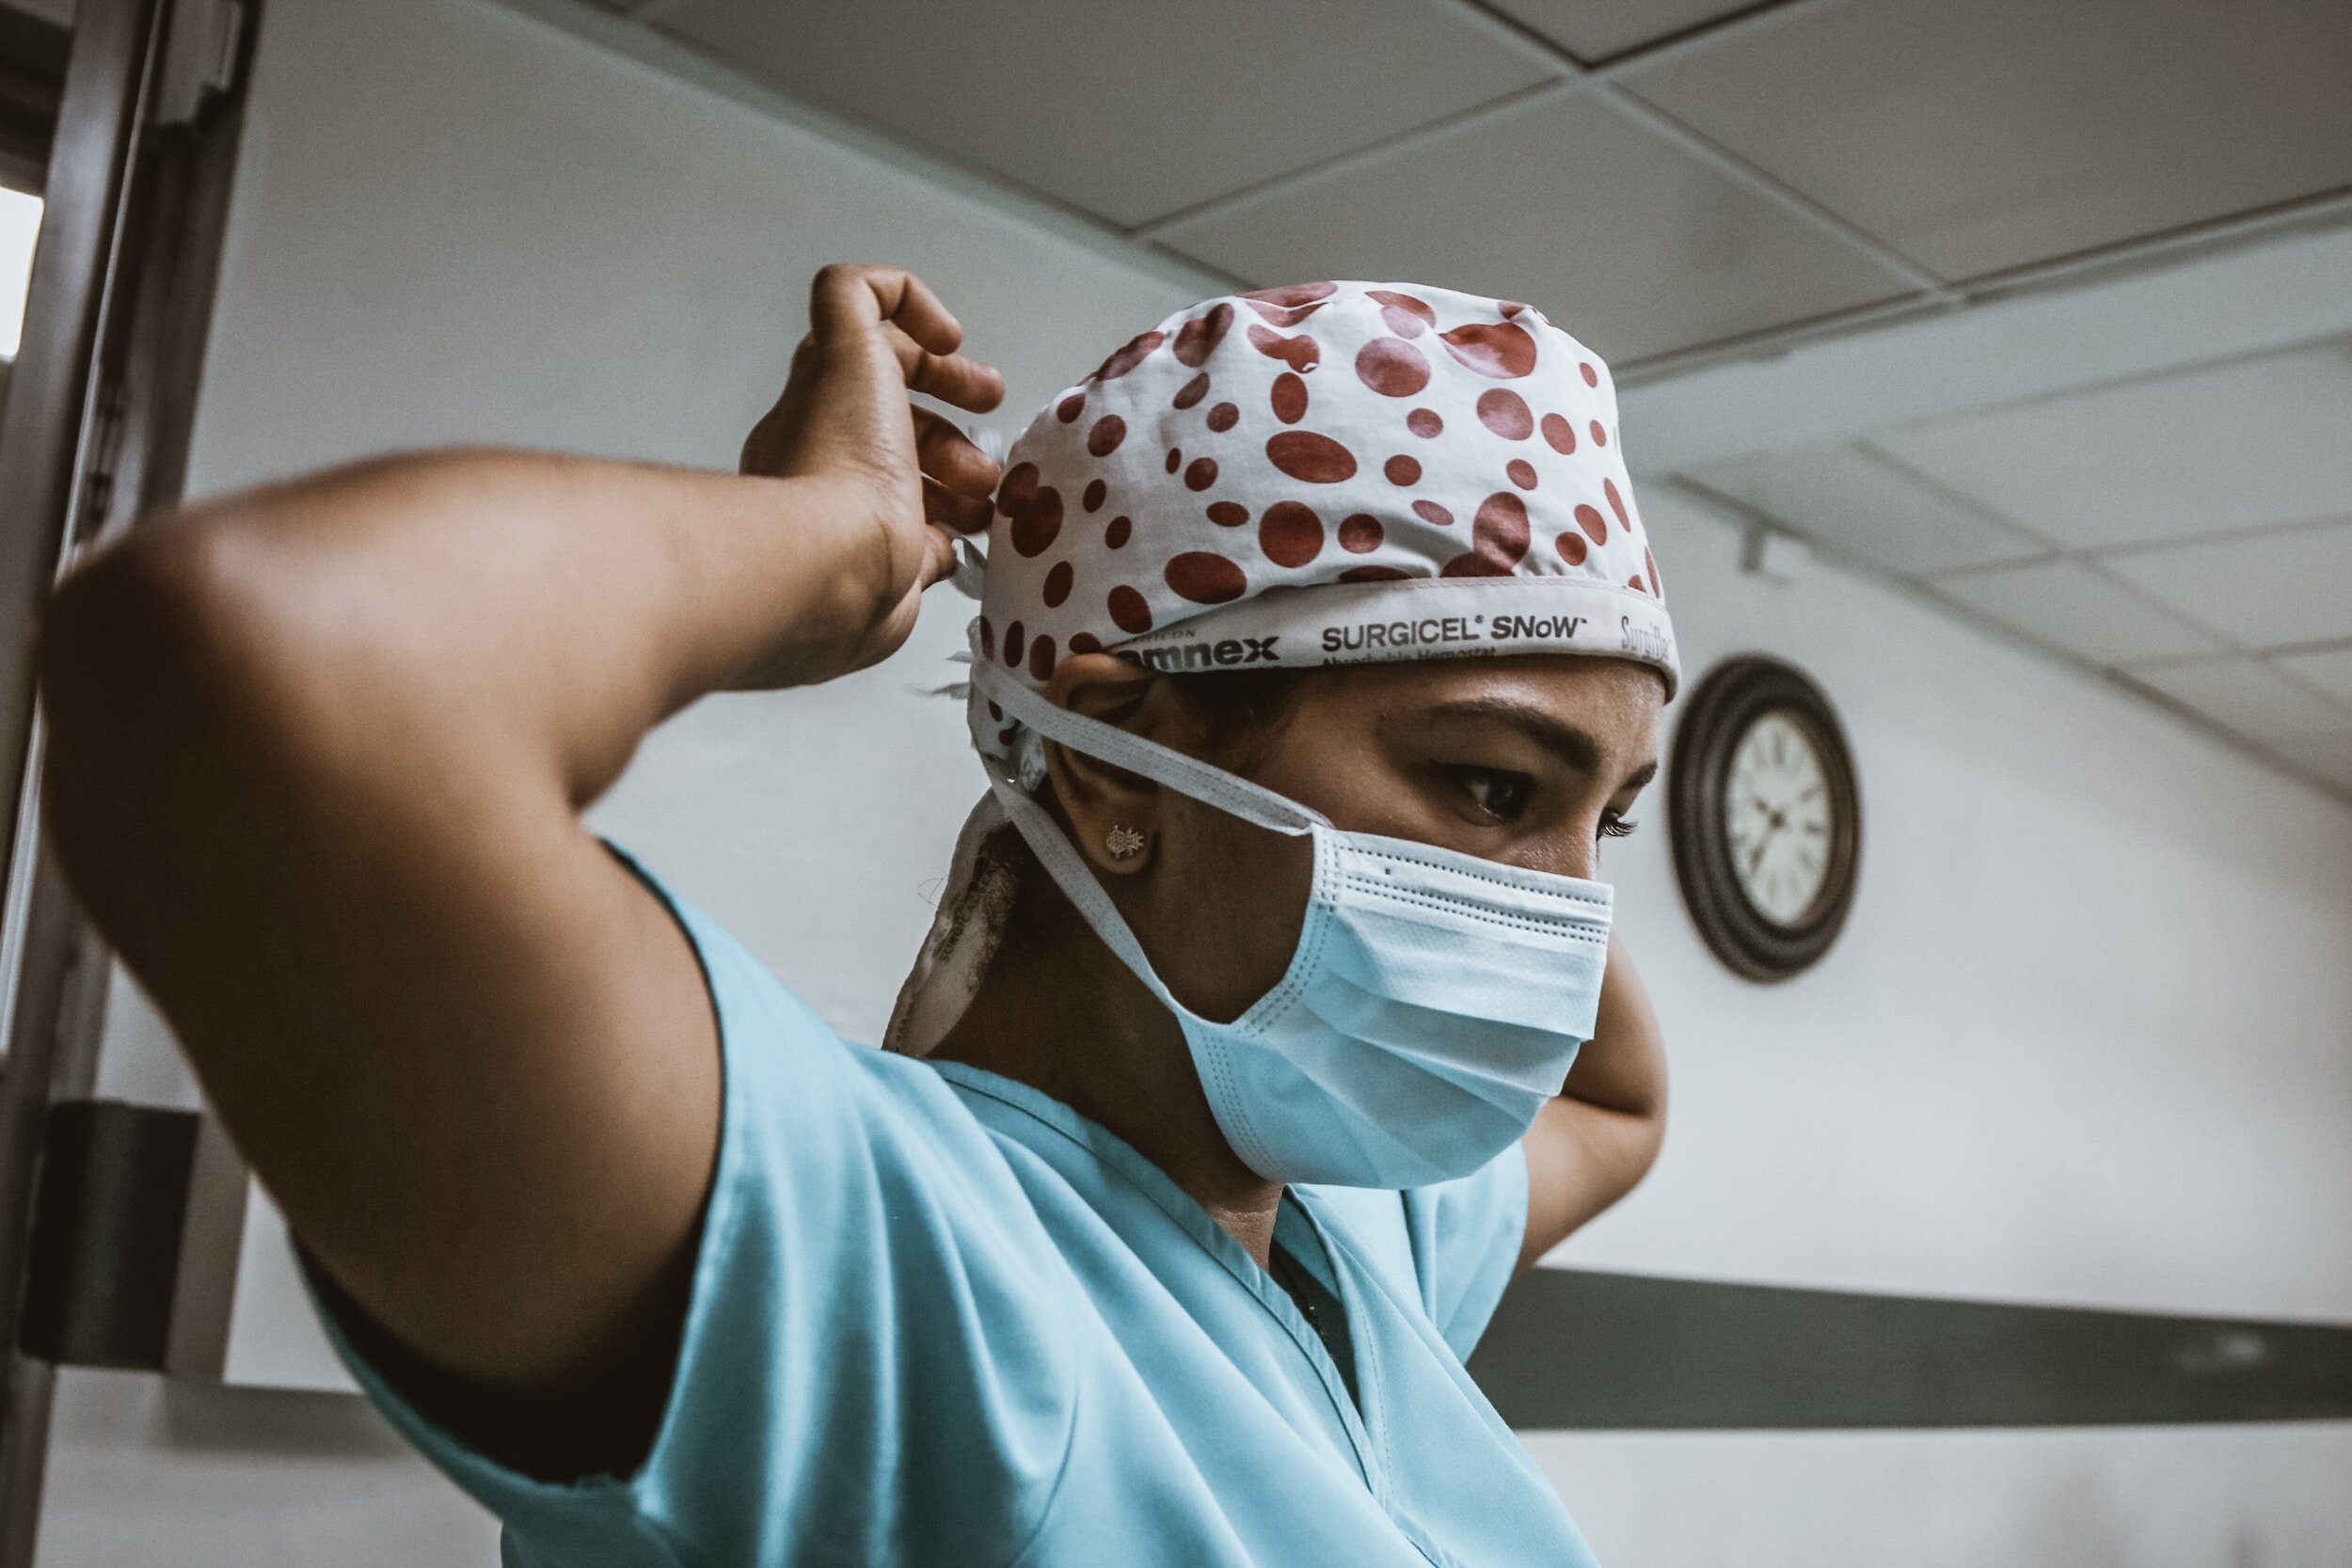 A healthcare professional is adjusting a protective face mask while wearing a polka dot scrub cap, in what appears to be a hospital setting.